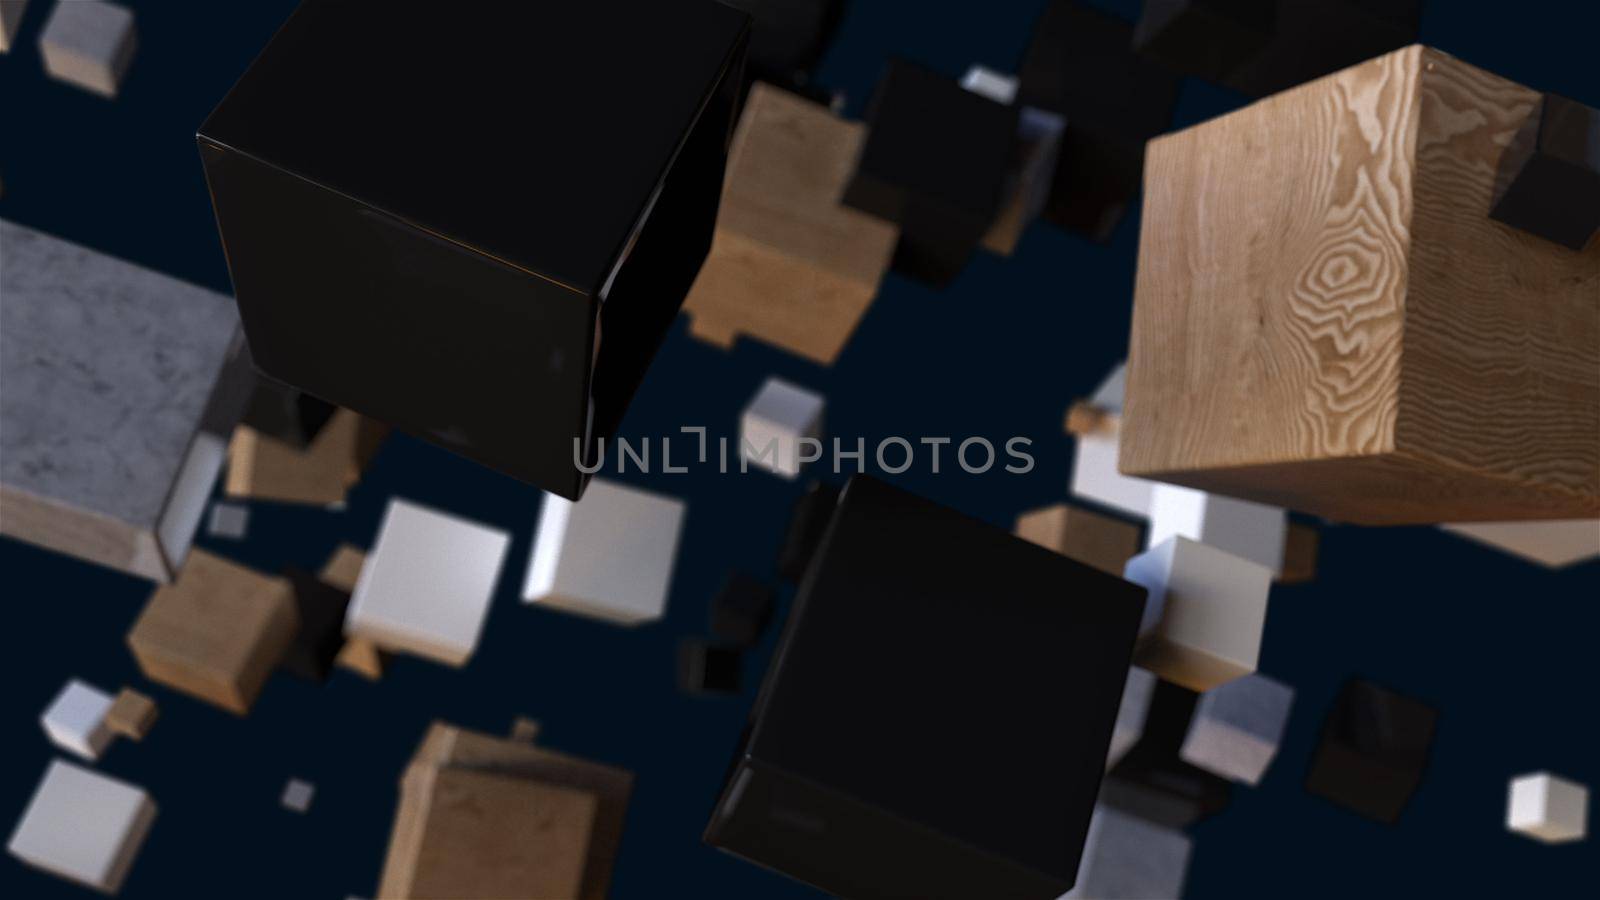 Square wooden 3d render boxes in digital space. Geometric solid plastic shapes in free realistic decoration fall. Graphic background presentation with simple moving objects.